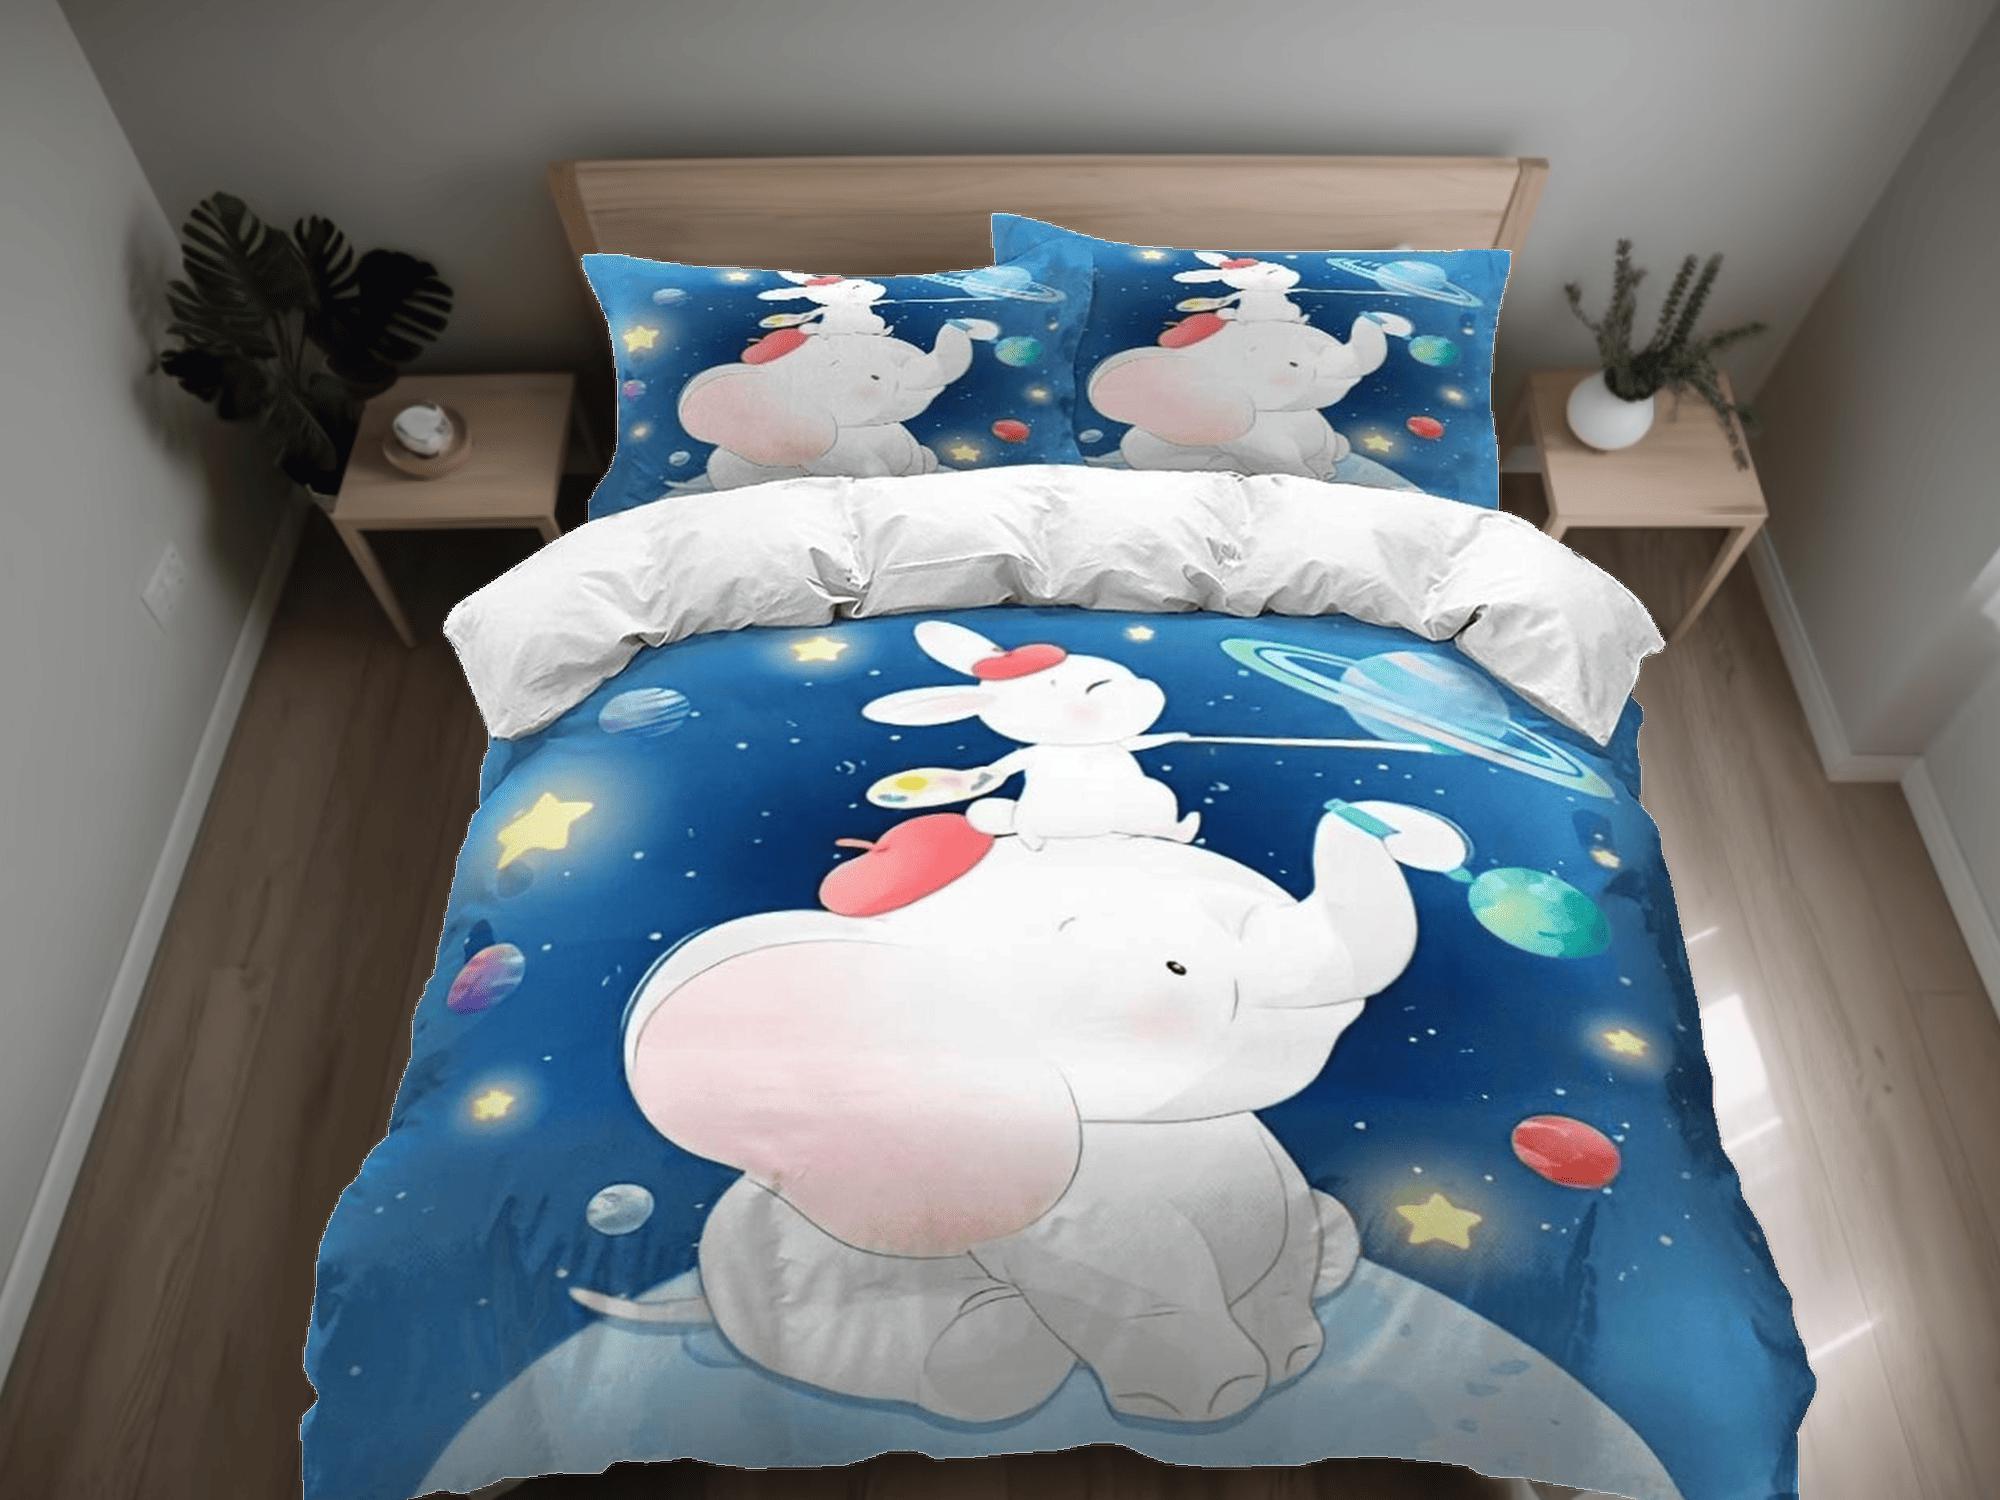 daintyduvet Elephant and bunny in galaxy bedding cute duvet cover set, kids bedding full, nursery bed decor, elephant baby shower, toddler bedding